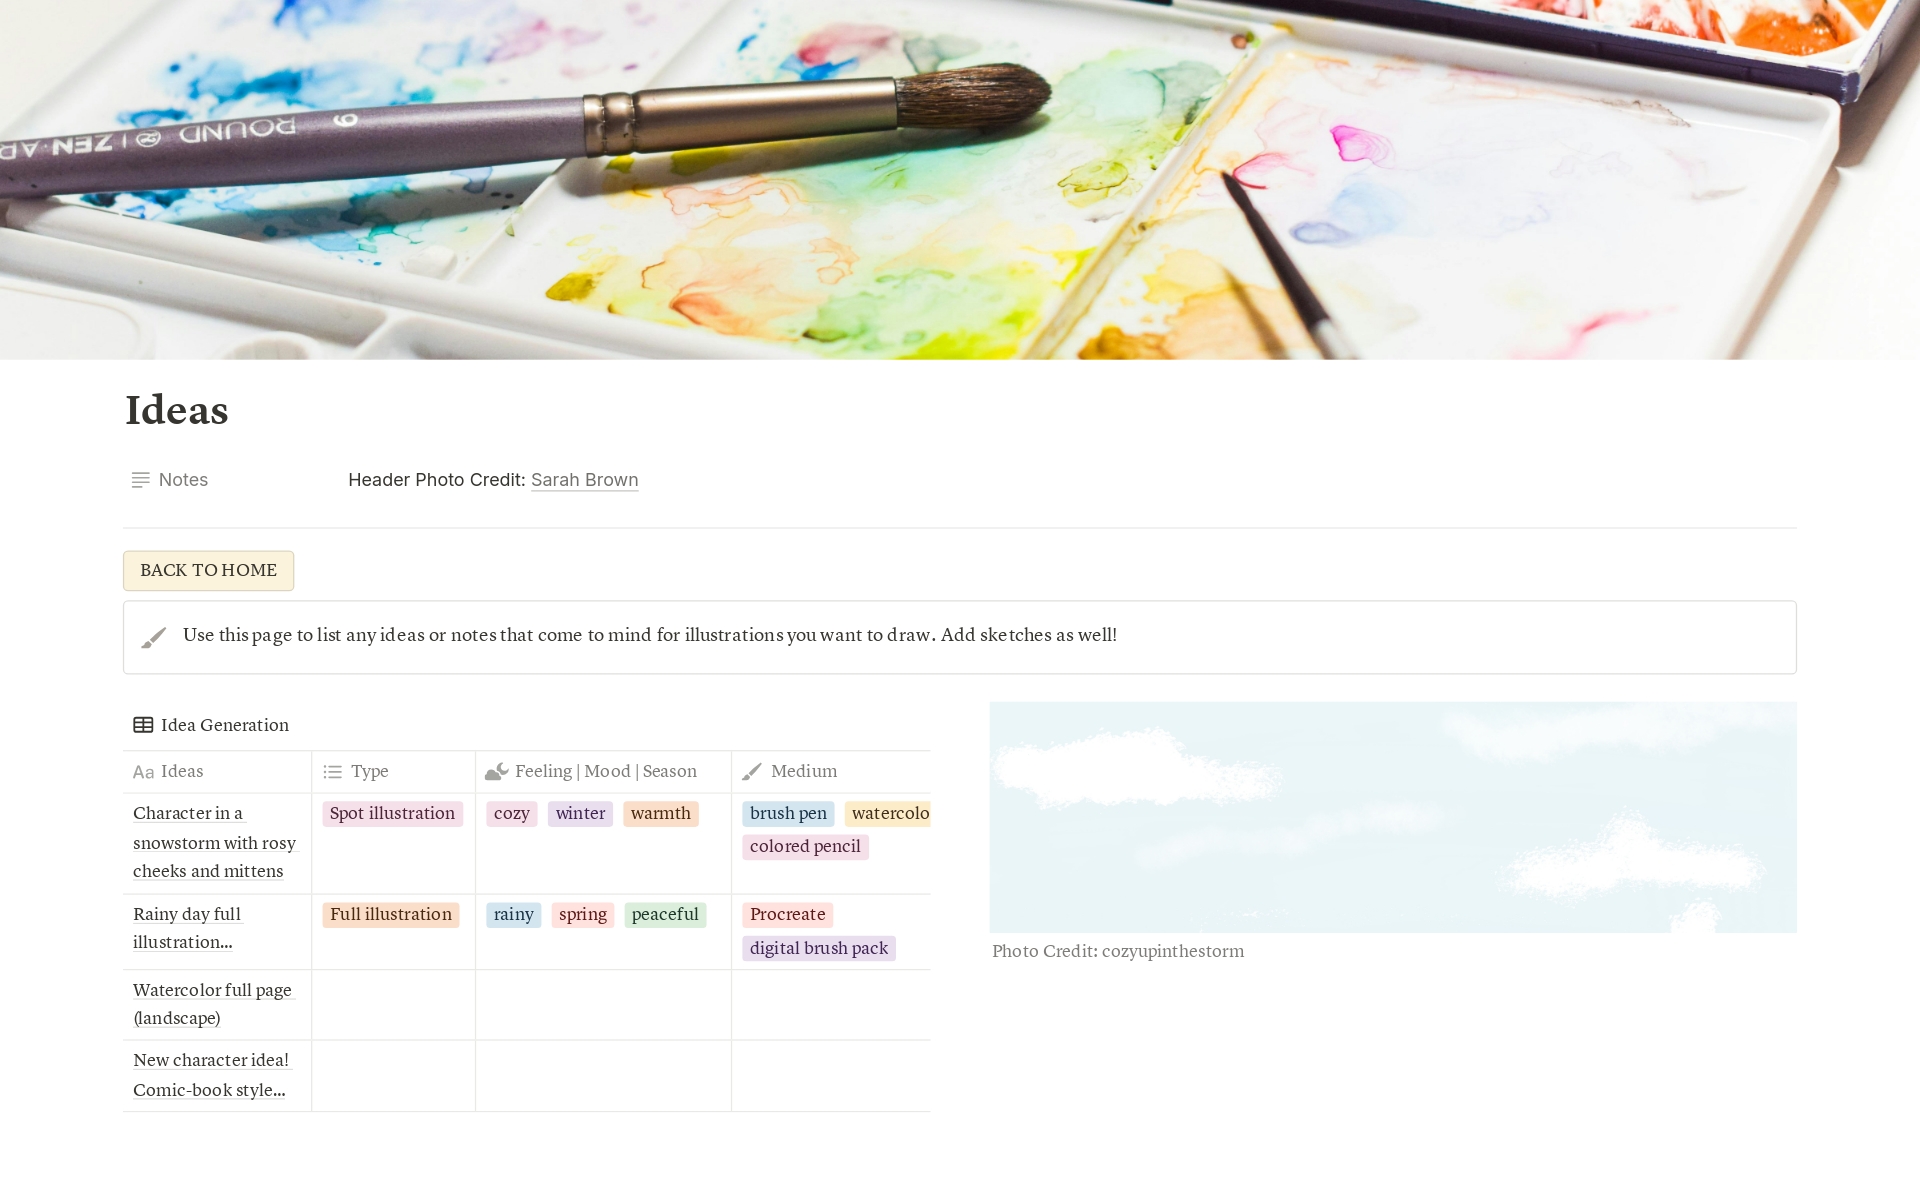 This template is perfect for any illustrator or artist hoping to organzine their ideas, projects, and goals in a simple and effective system. 